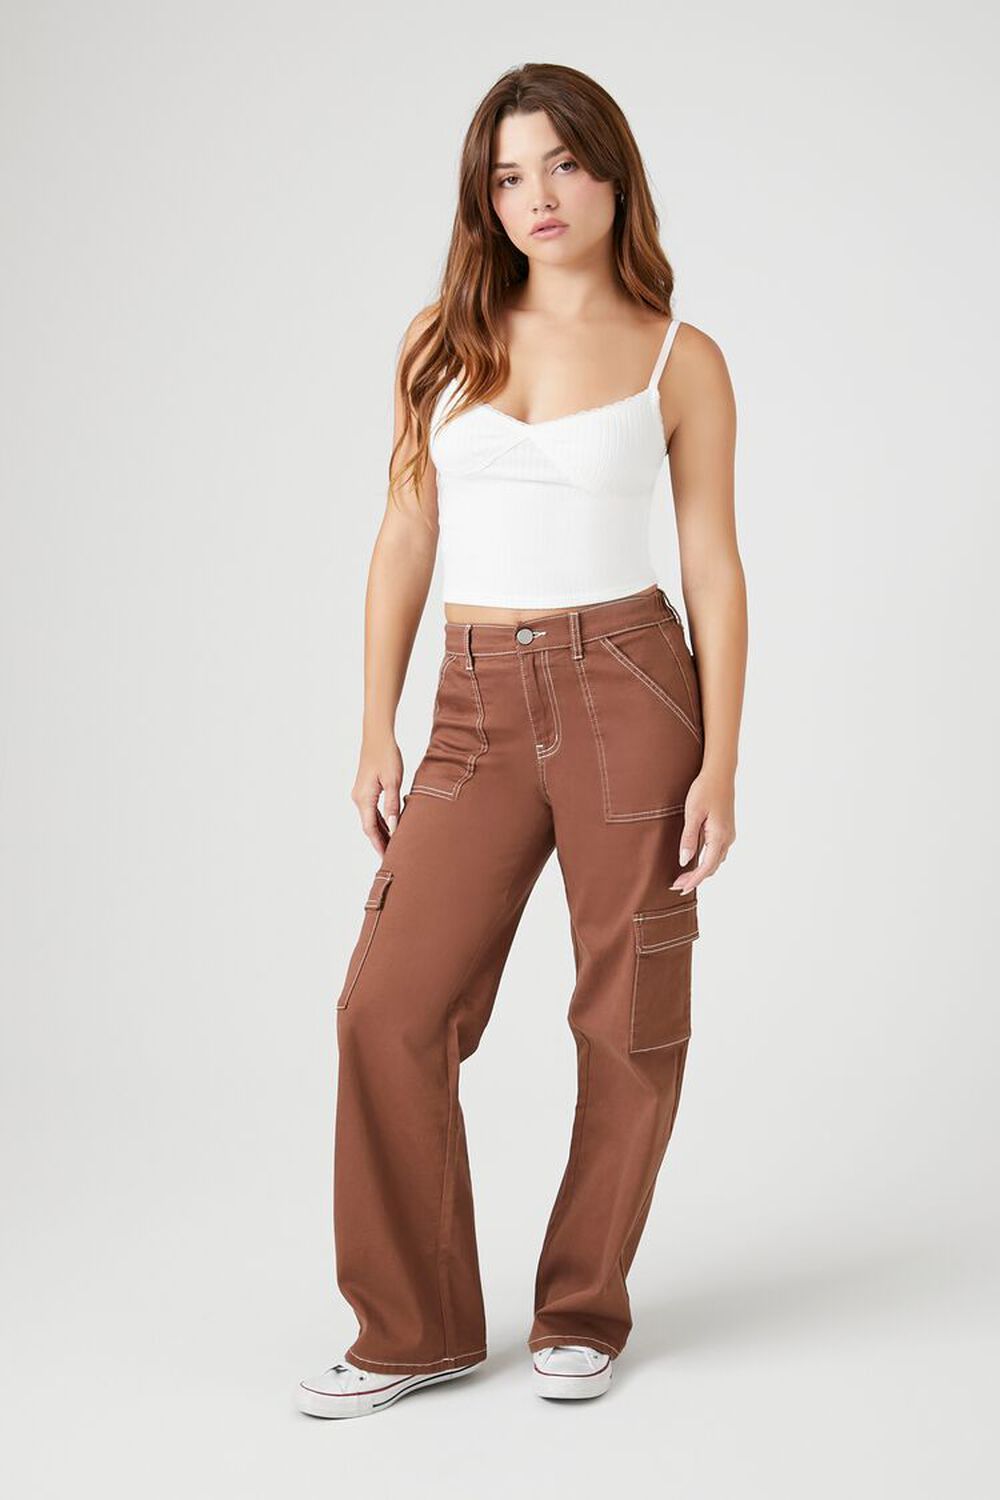 BROWN Twill Cargo Pants, image 1